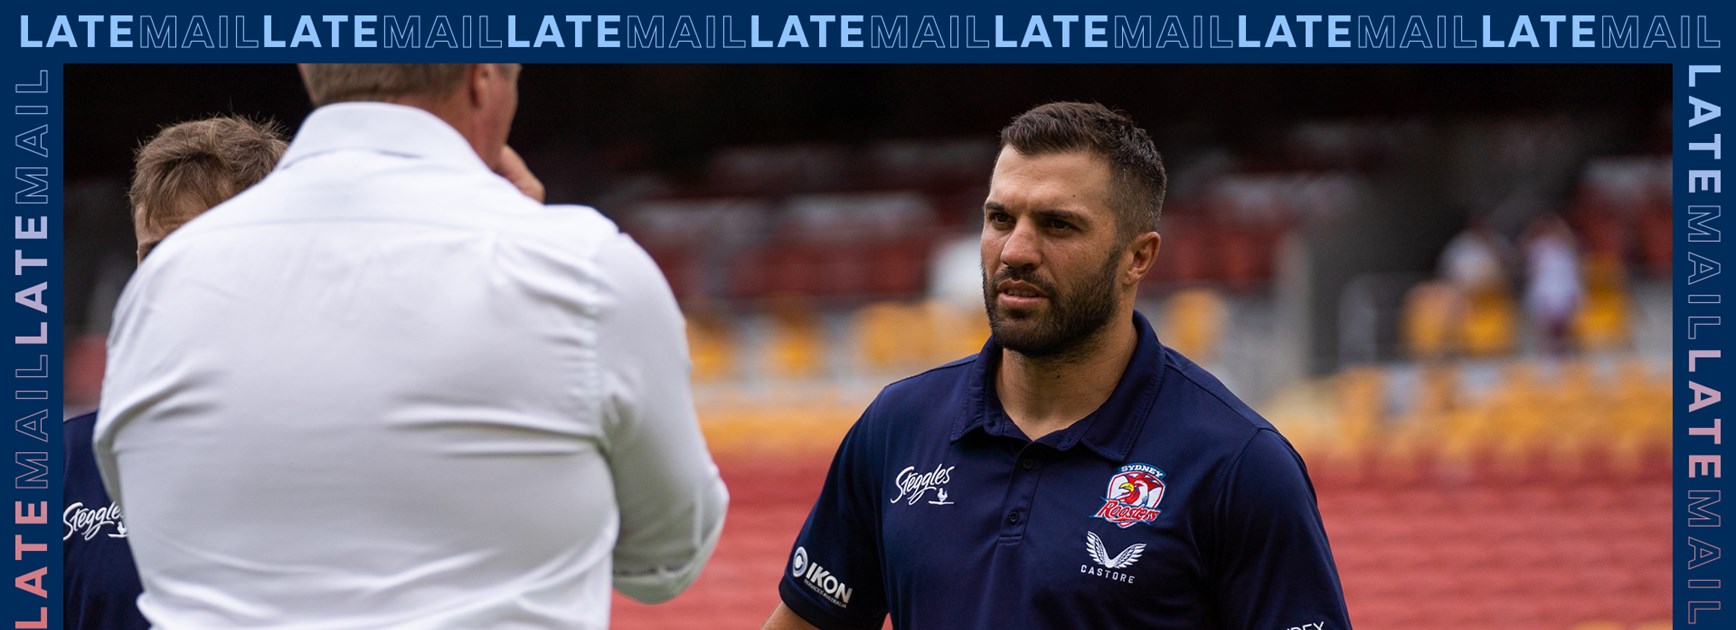 NRL Late Mail: Round 1 vs Dolphins